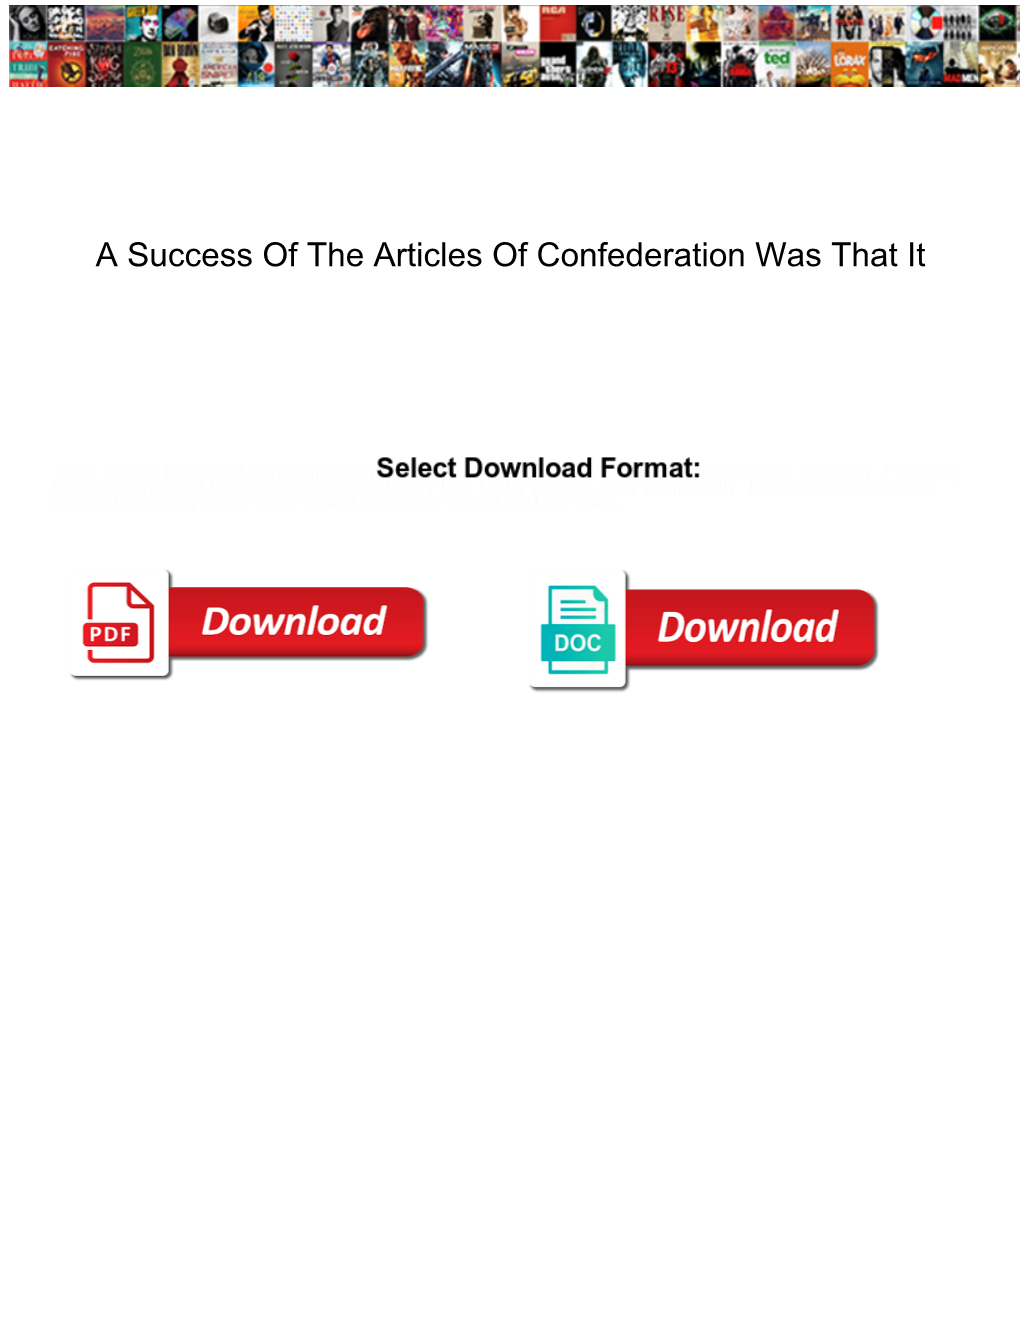 A Success of the Articles of Confederation Was That It